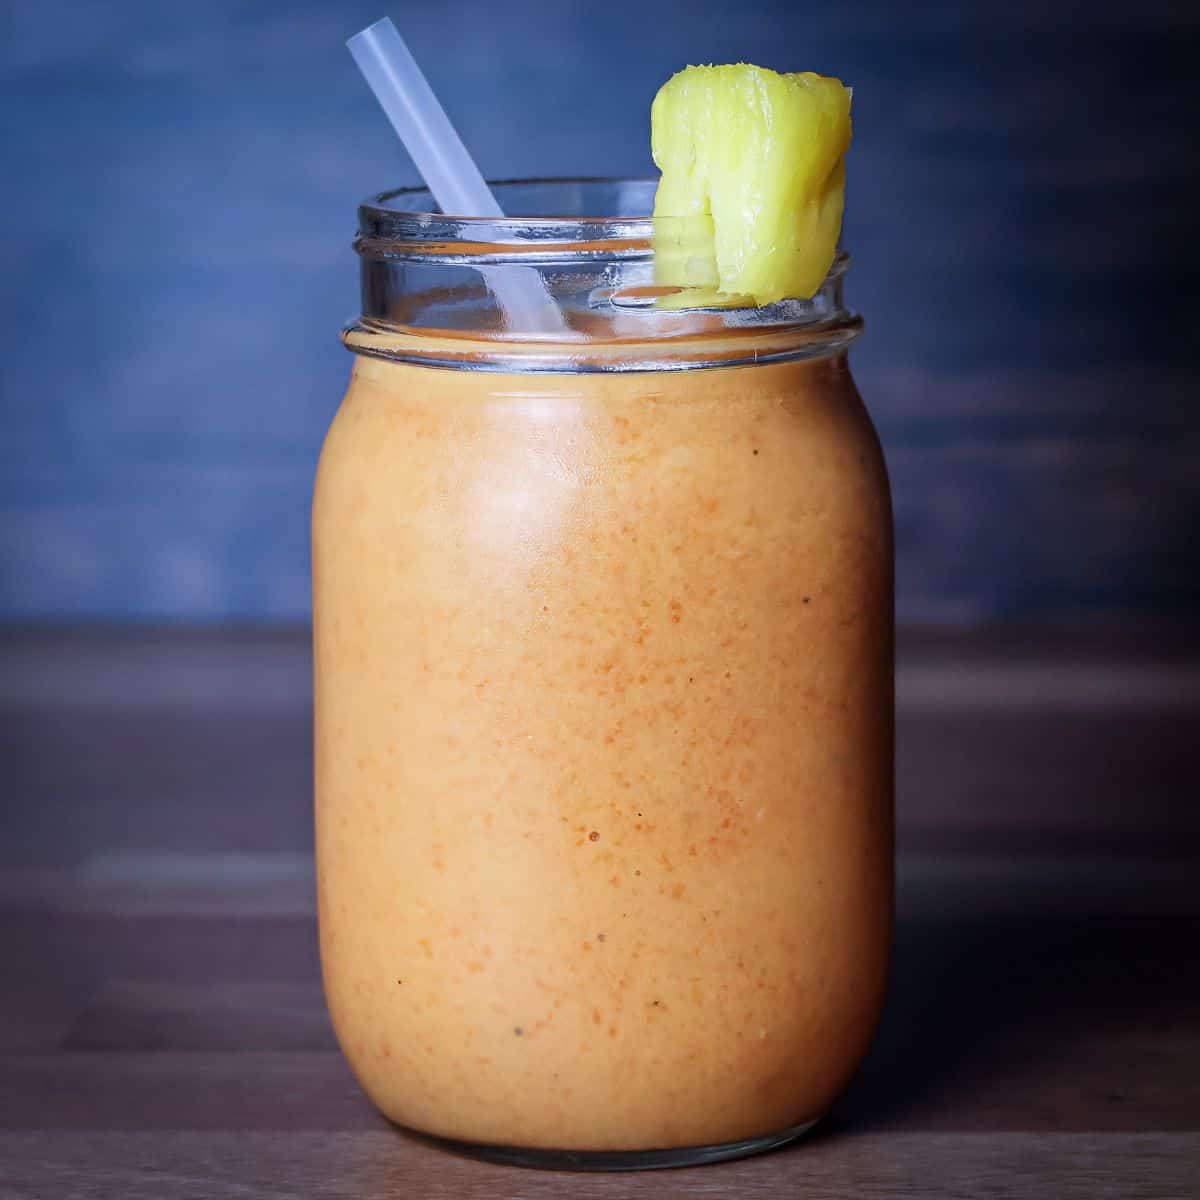 A finished smoothie in a glass jar garnished with a pineapple wedge, resembling a recipe from Smoothie King.